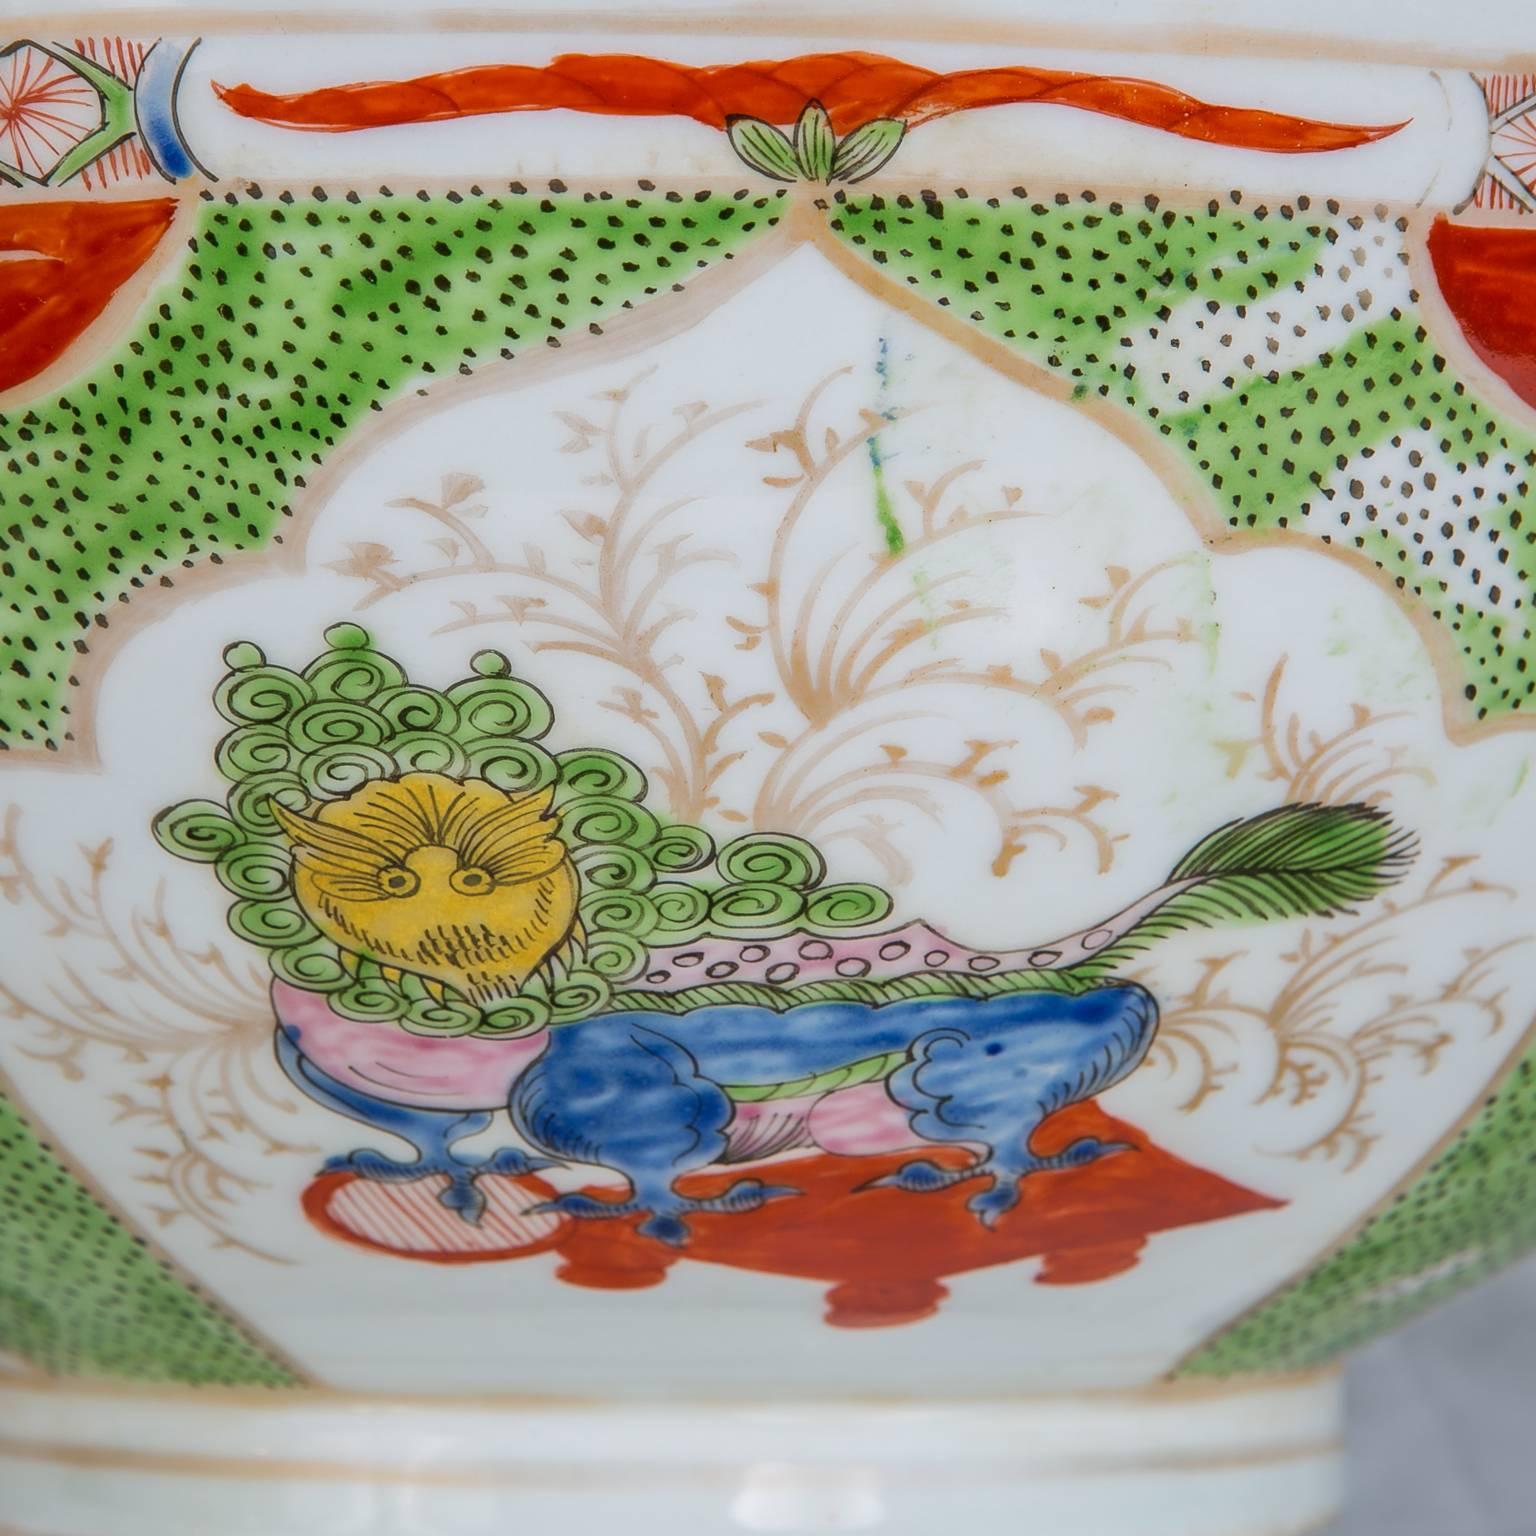 Dragons in Compartments Porcelain Punch Bowl Made, circa 1880 im Zustand „Hervorragend“ in Katonah, NY